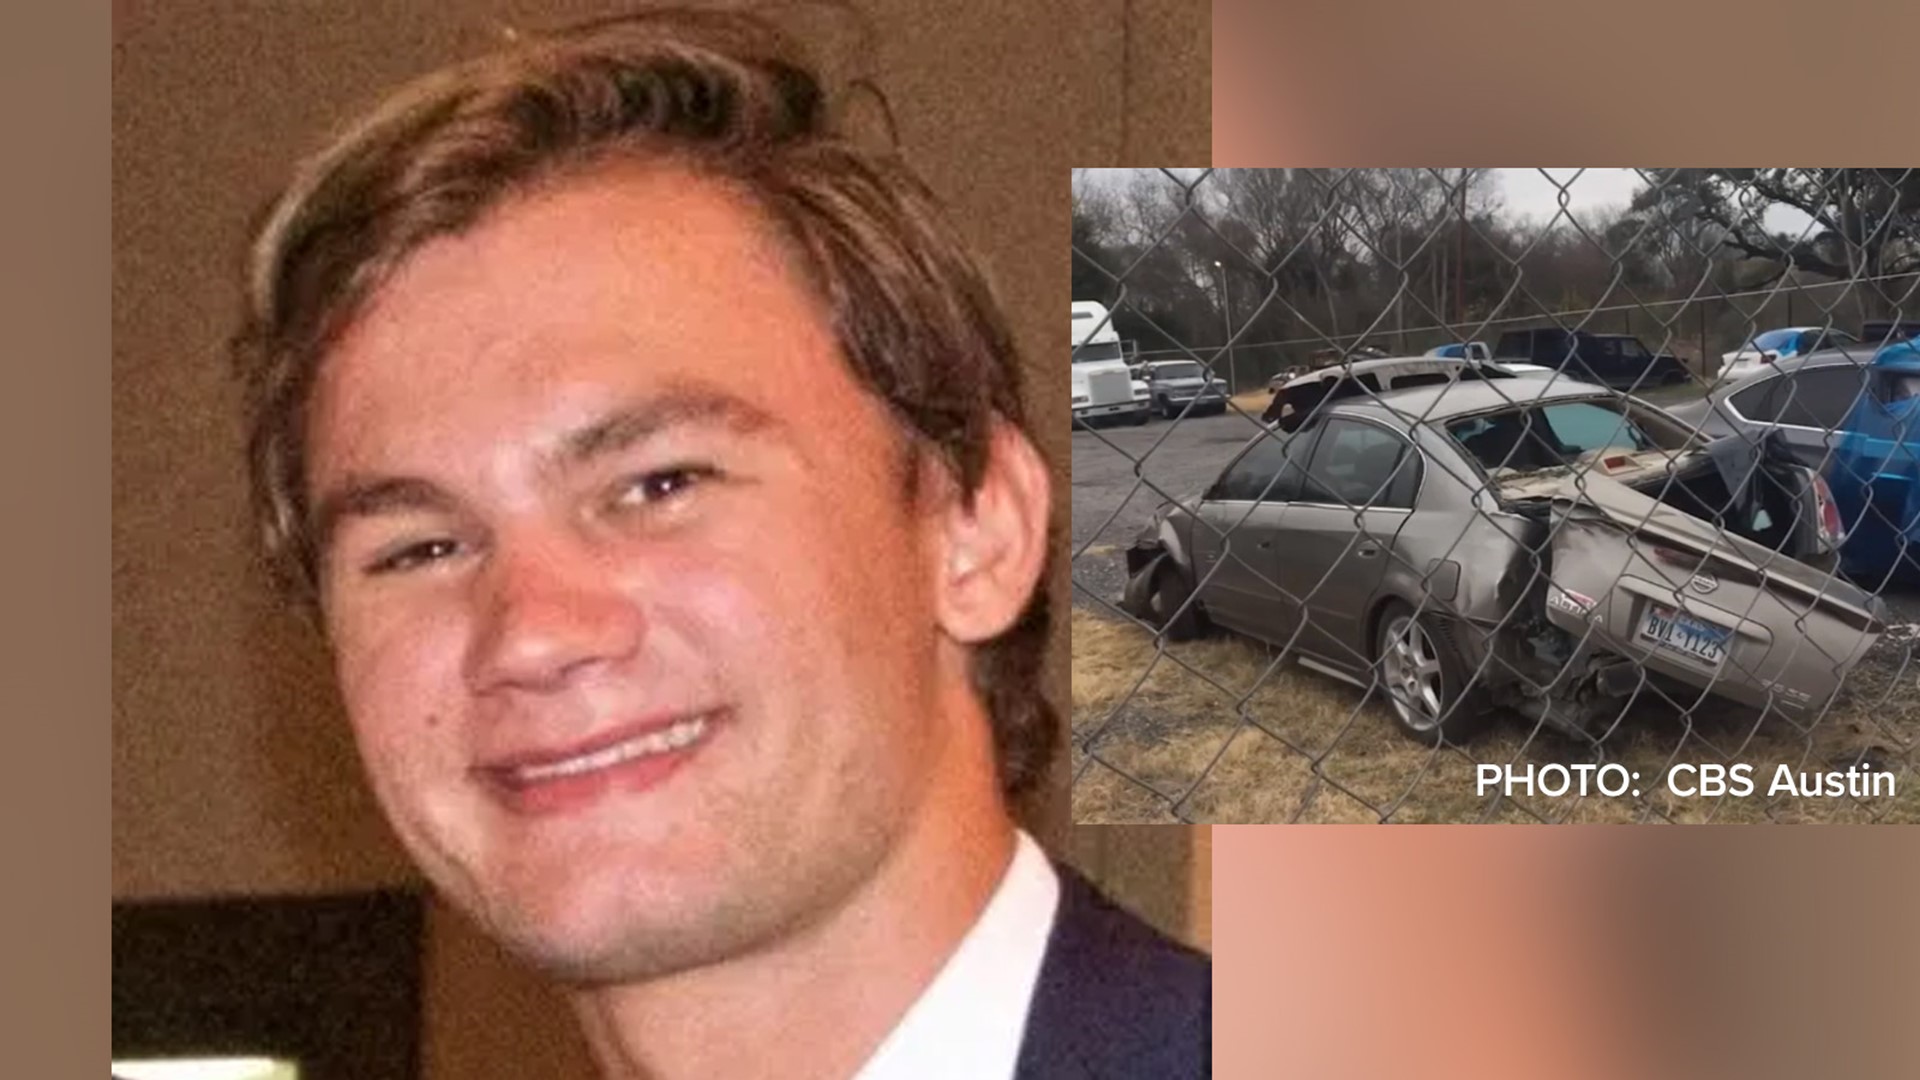 Family members tell CBS Austin that 21-year-old Jason Landry was reported missing early Monday after a car wreck